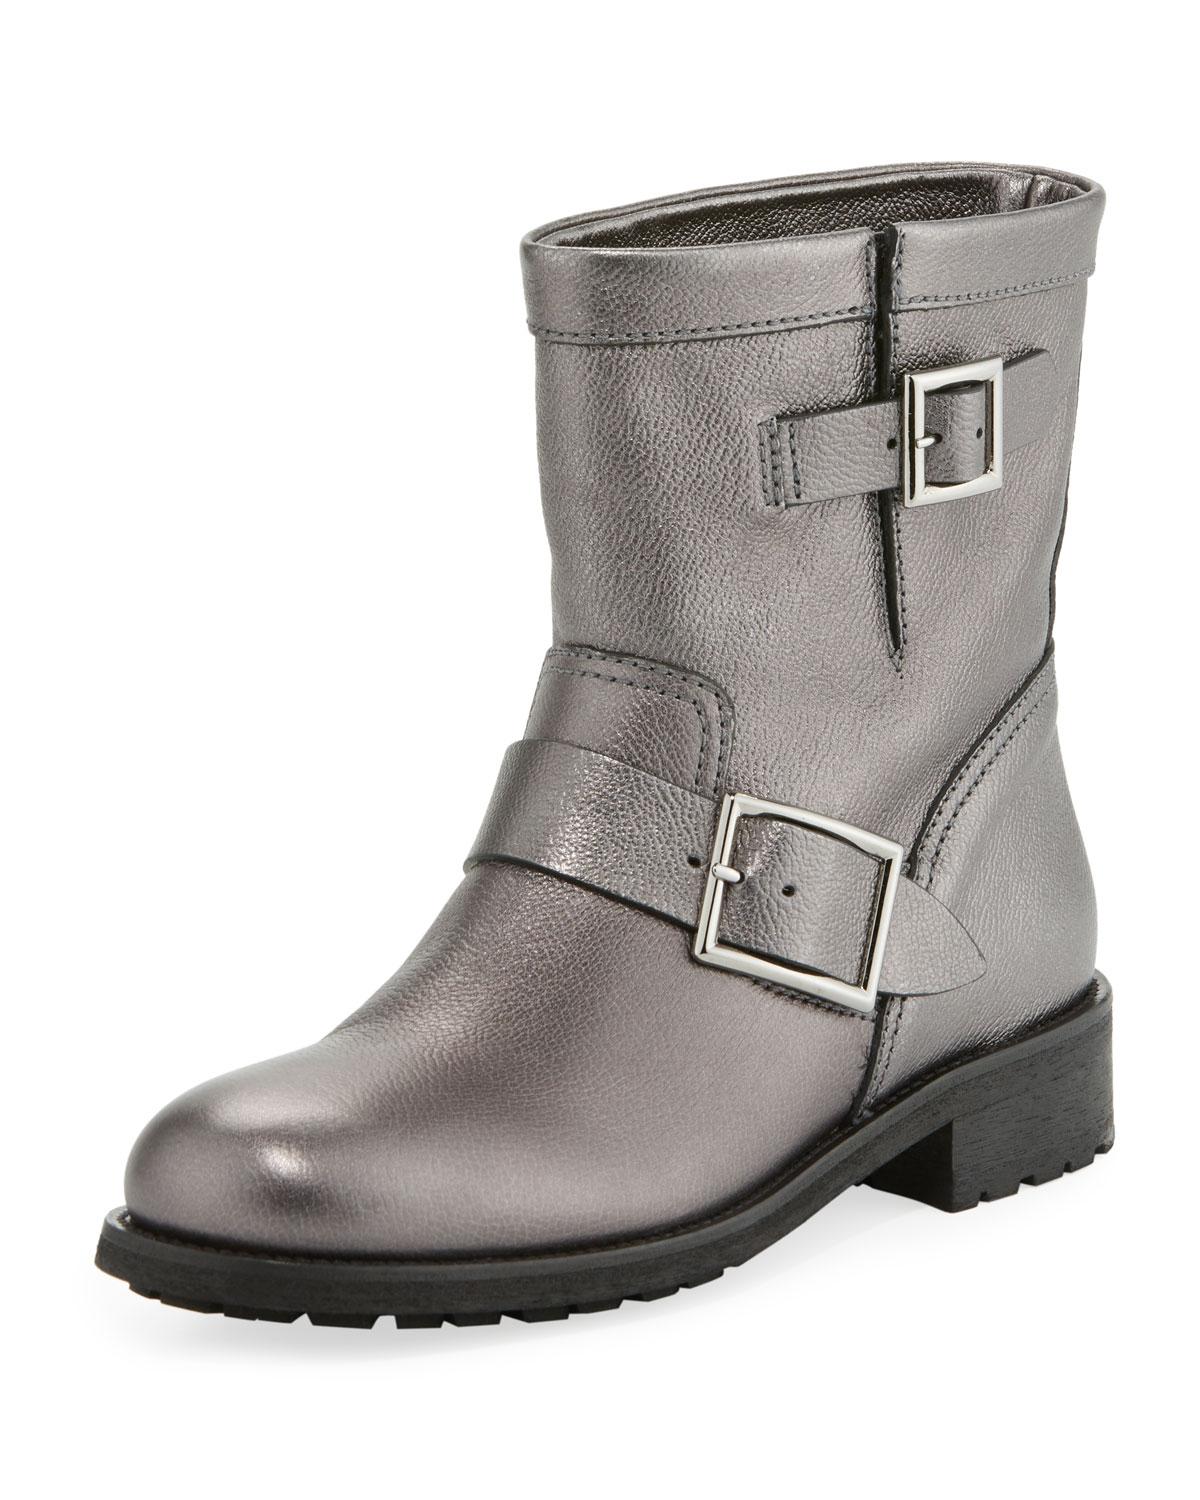 Jimmy Choo Youth Flat Metallic Leather Moto Boots in Gray